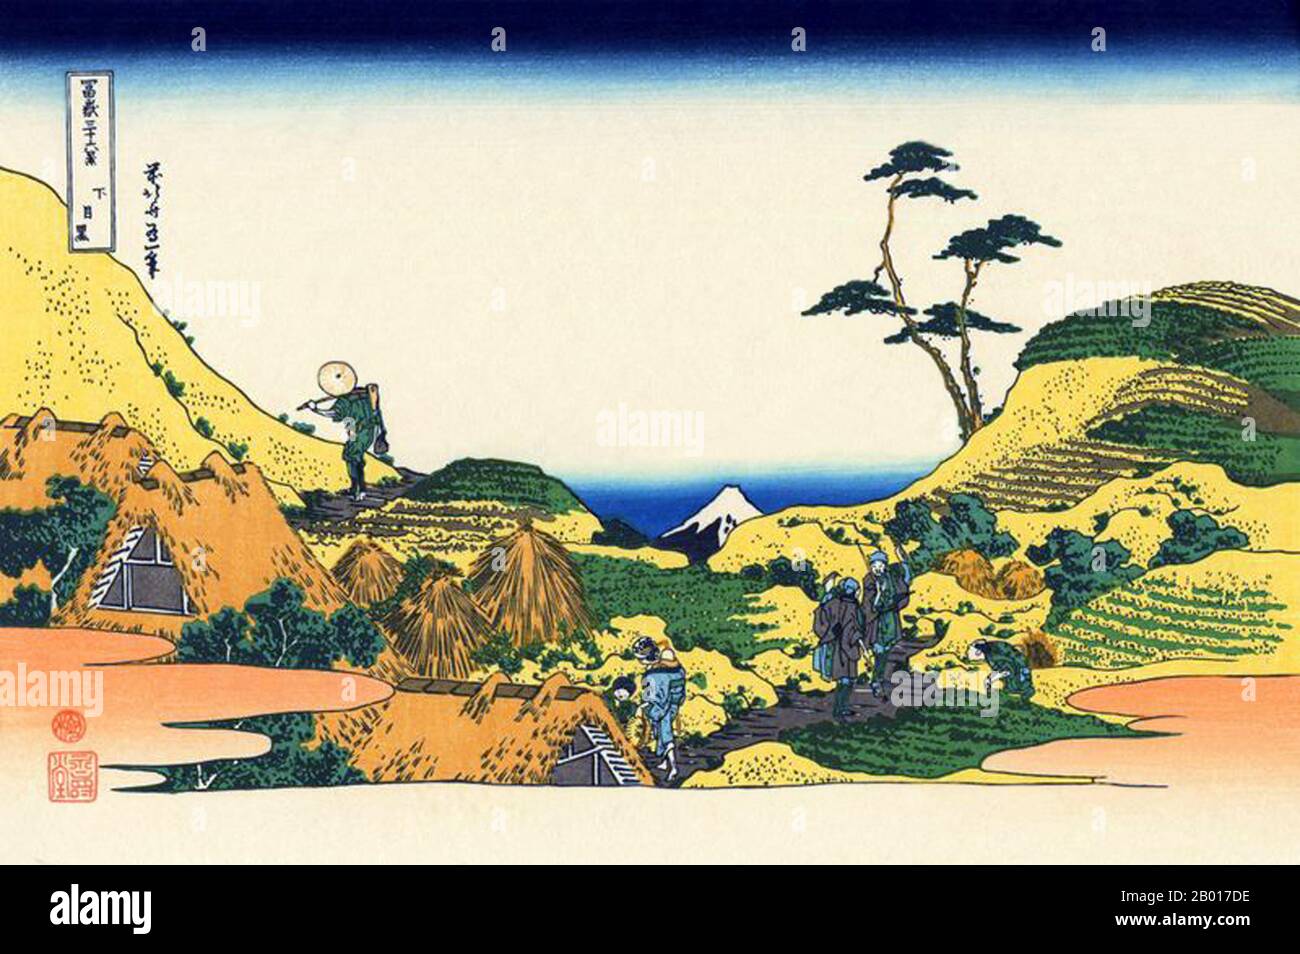 Japan: ‘Shimomeguro (Lower Meguro)’. Ukiyo-e woodblock print from the series ‘Thirty-Six Views of Mount Fuji’ by Katsushika Hokusai (31 October 1760 - 10 May 1849), 1830.  ‘Thirty-six Views of Mount Fuji’ is an ‘ukiyo-e’ series of woodcut prints by Japanese artist Katsushika Hokusai. The series depicts Mount Fuji in differing seasons and weather conditions from a variety of places and distances. It actually consists of 46 prints created between 1826 and 1833. The first 36 were included in the original publication and, due to their popularity, 10 more were added after the original publication. Stock Photo